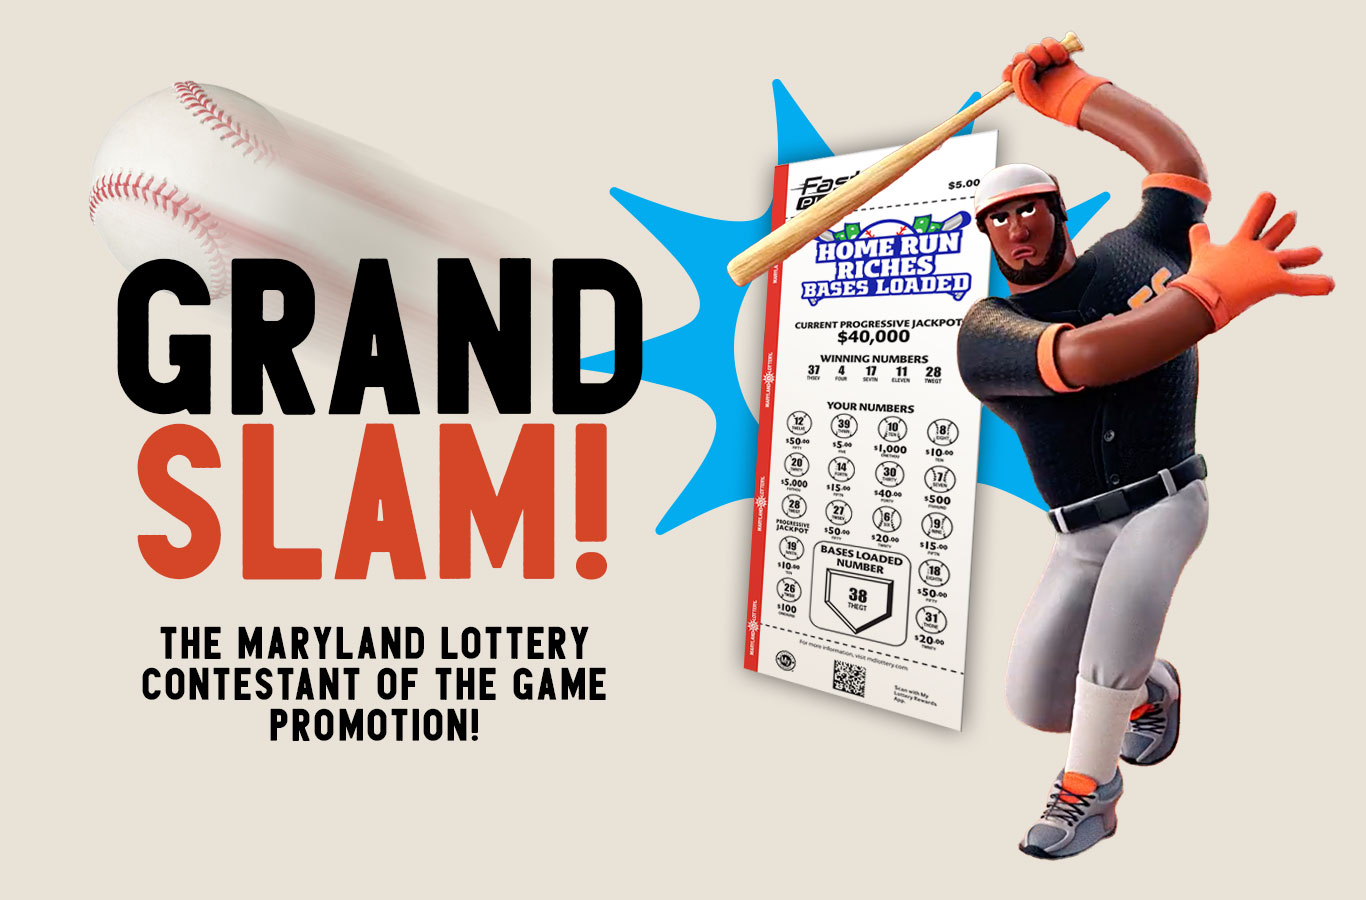 Your chance to turn Orioles™ home runs into cash as the Maryland Lottery Contestant of the Game!